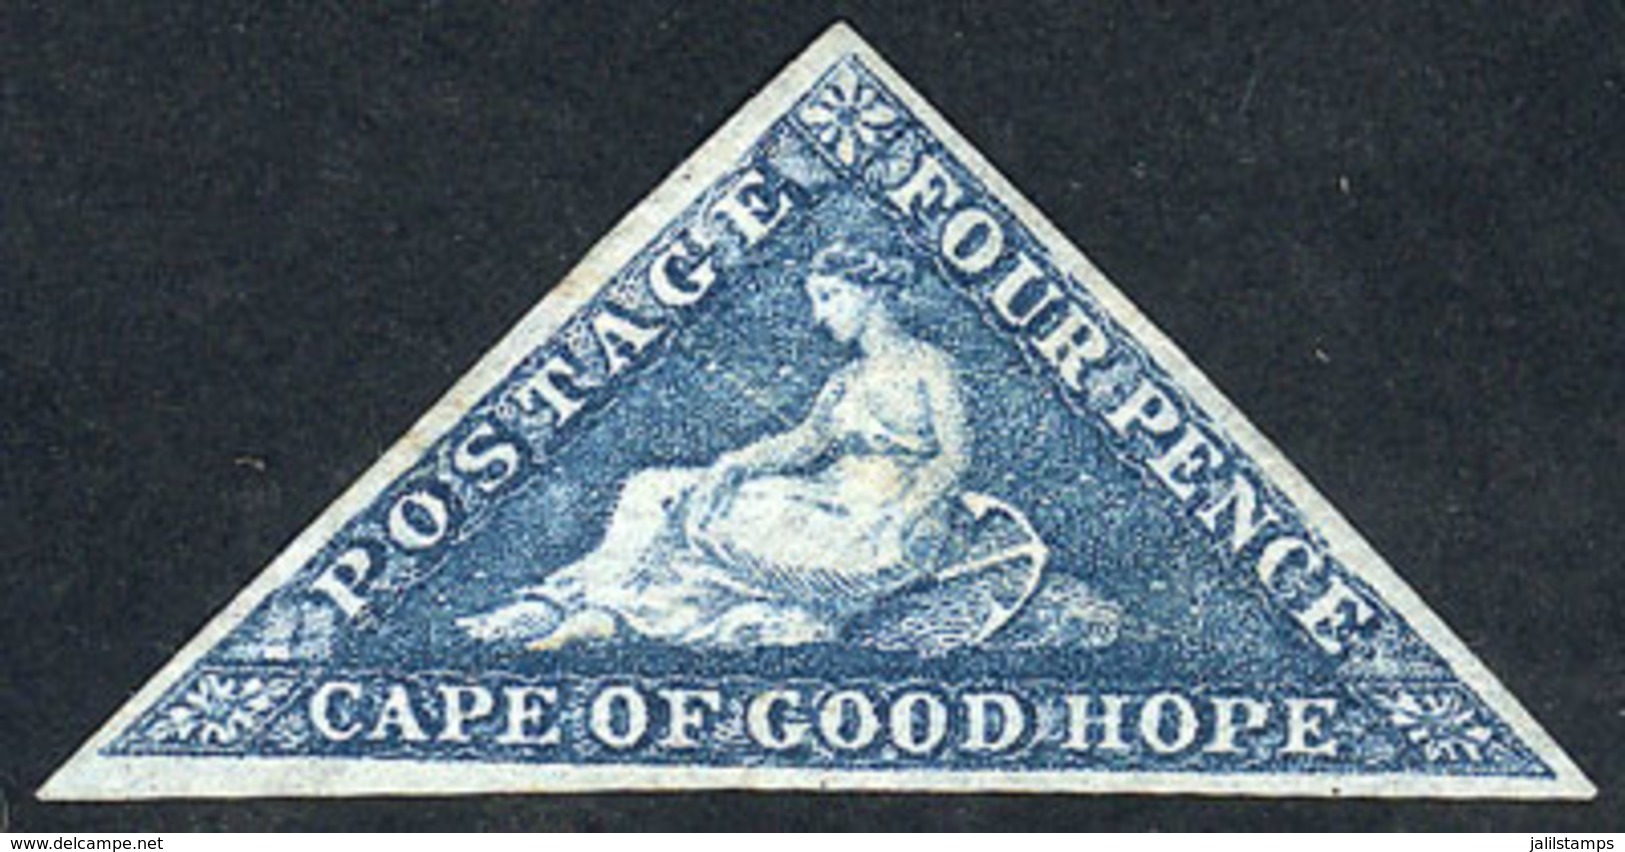 970 CAPE OF GOOD HOPE: Sc.13c, 1863/4 4p. Grayish Blue, Mint Without Gum, Wide Margins, Very Nice! - Africa (Varia)